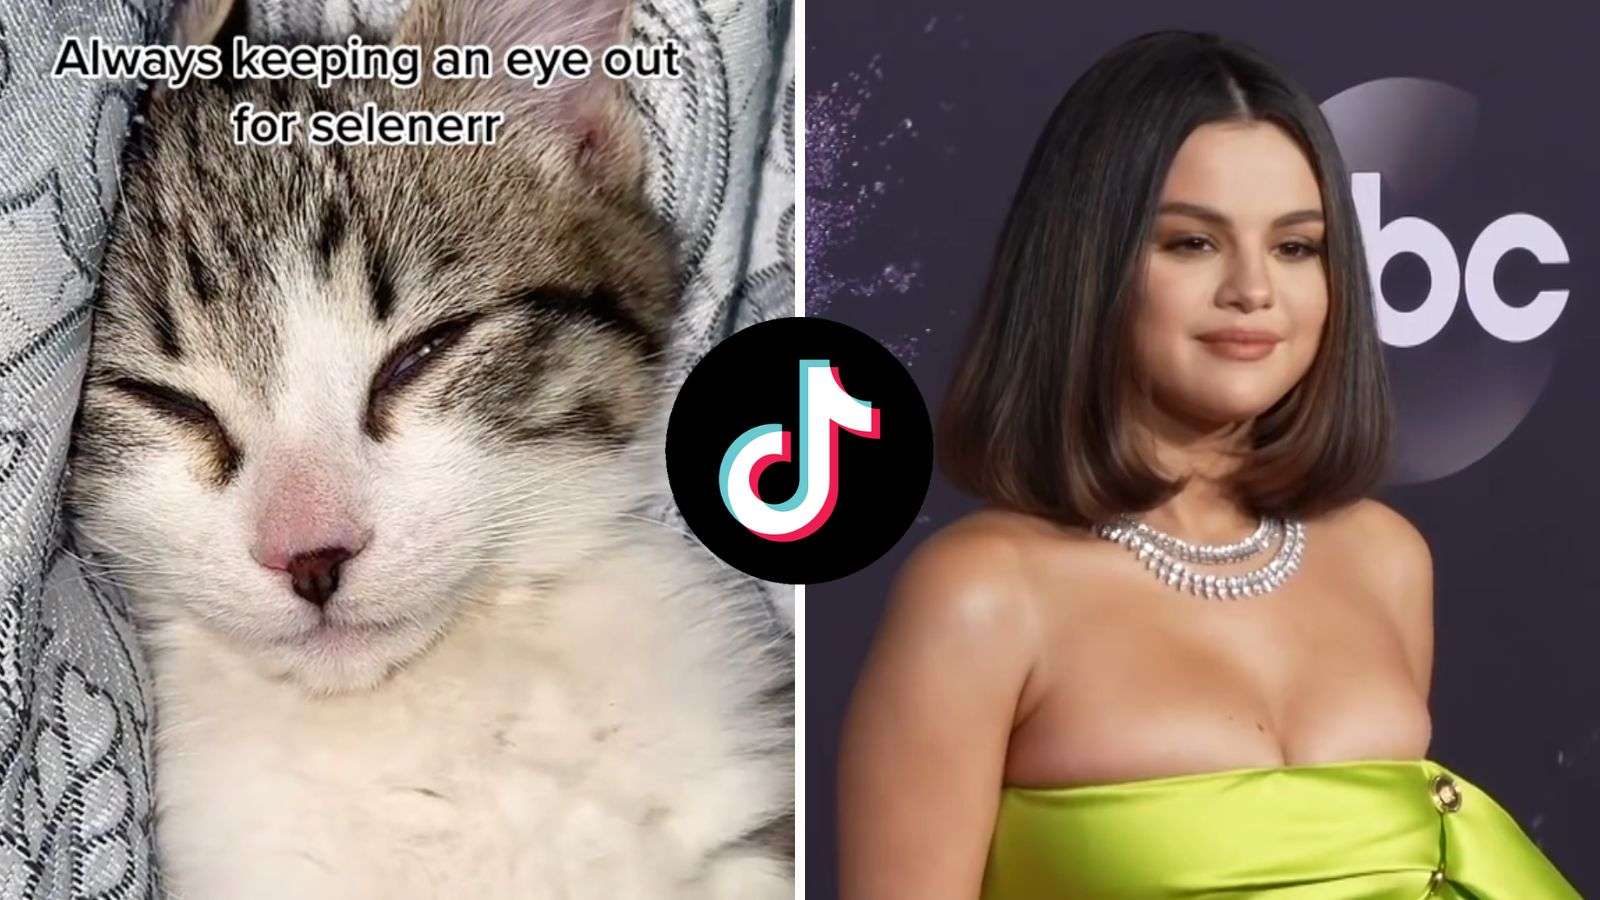 First photo shows a cat opening one eye, Second photo shows Selena Gomez.